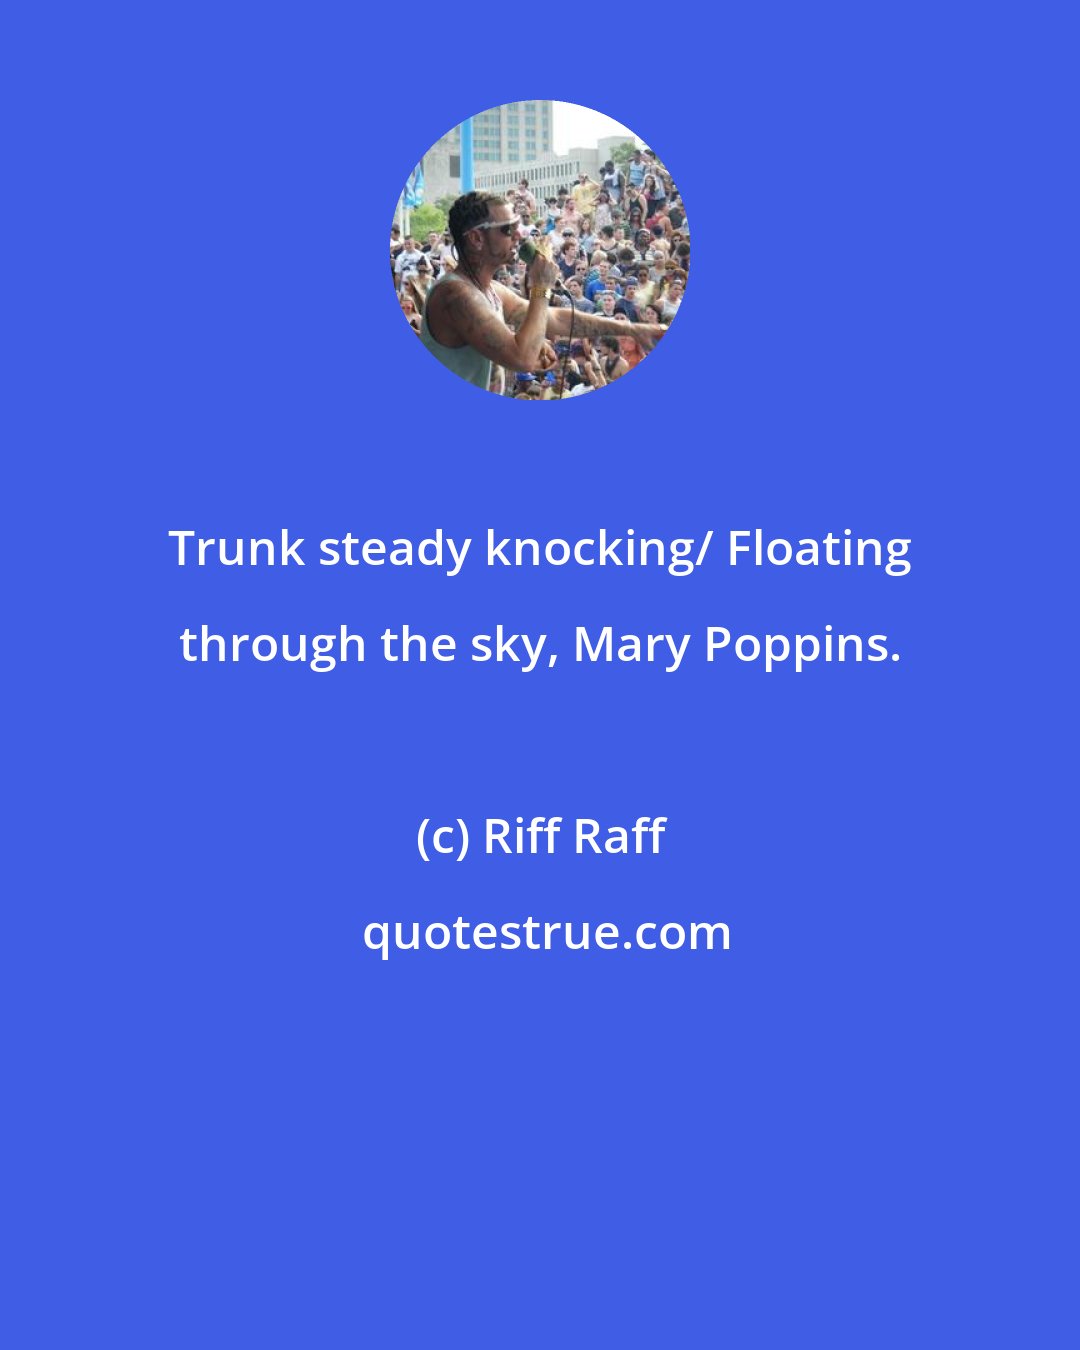 Riff Raff: Trunk steady knocking/ Floating through the sky, Mary Poppins.